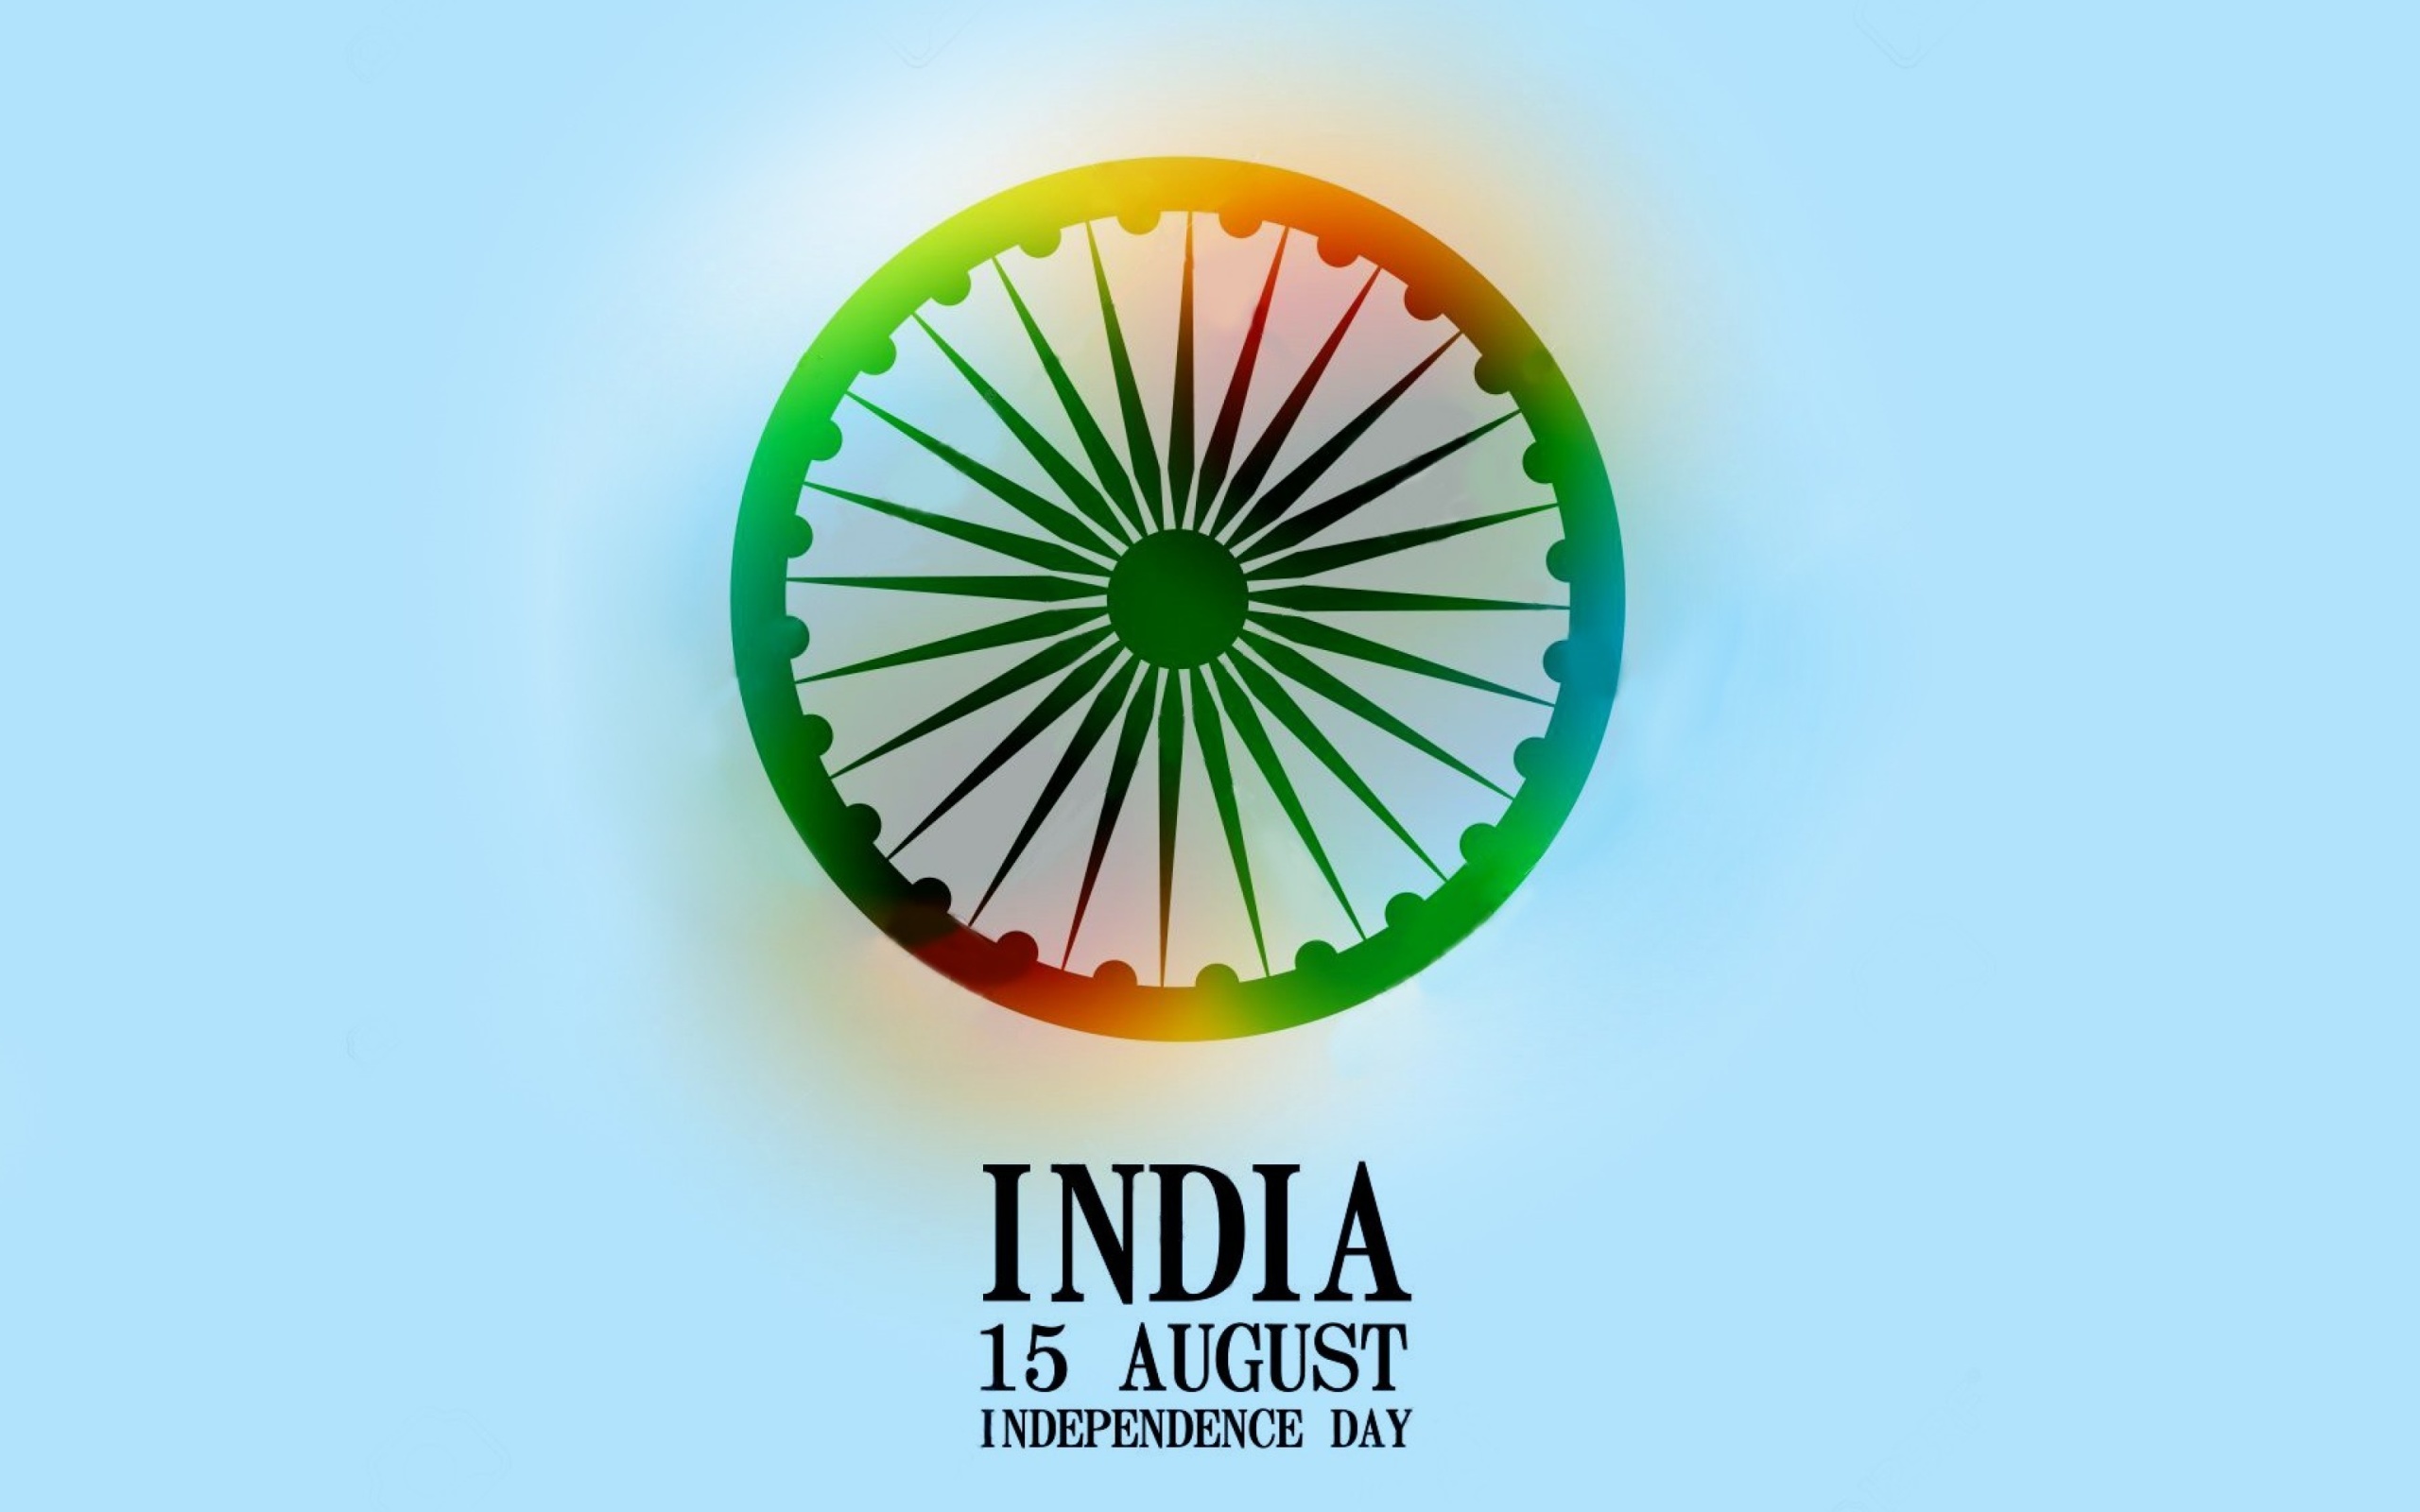 India Independence Day 15 August wallpaper 2560x1600